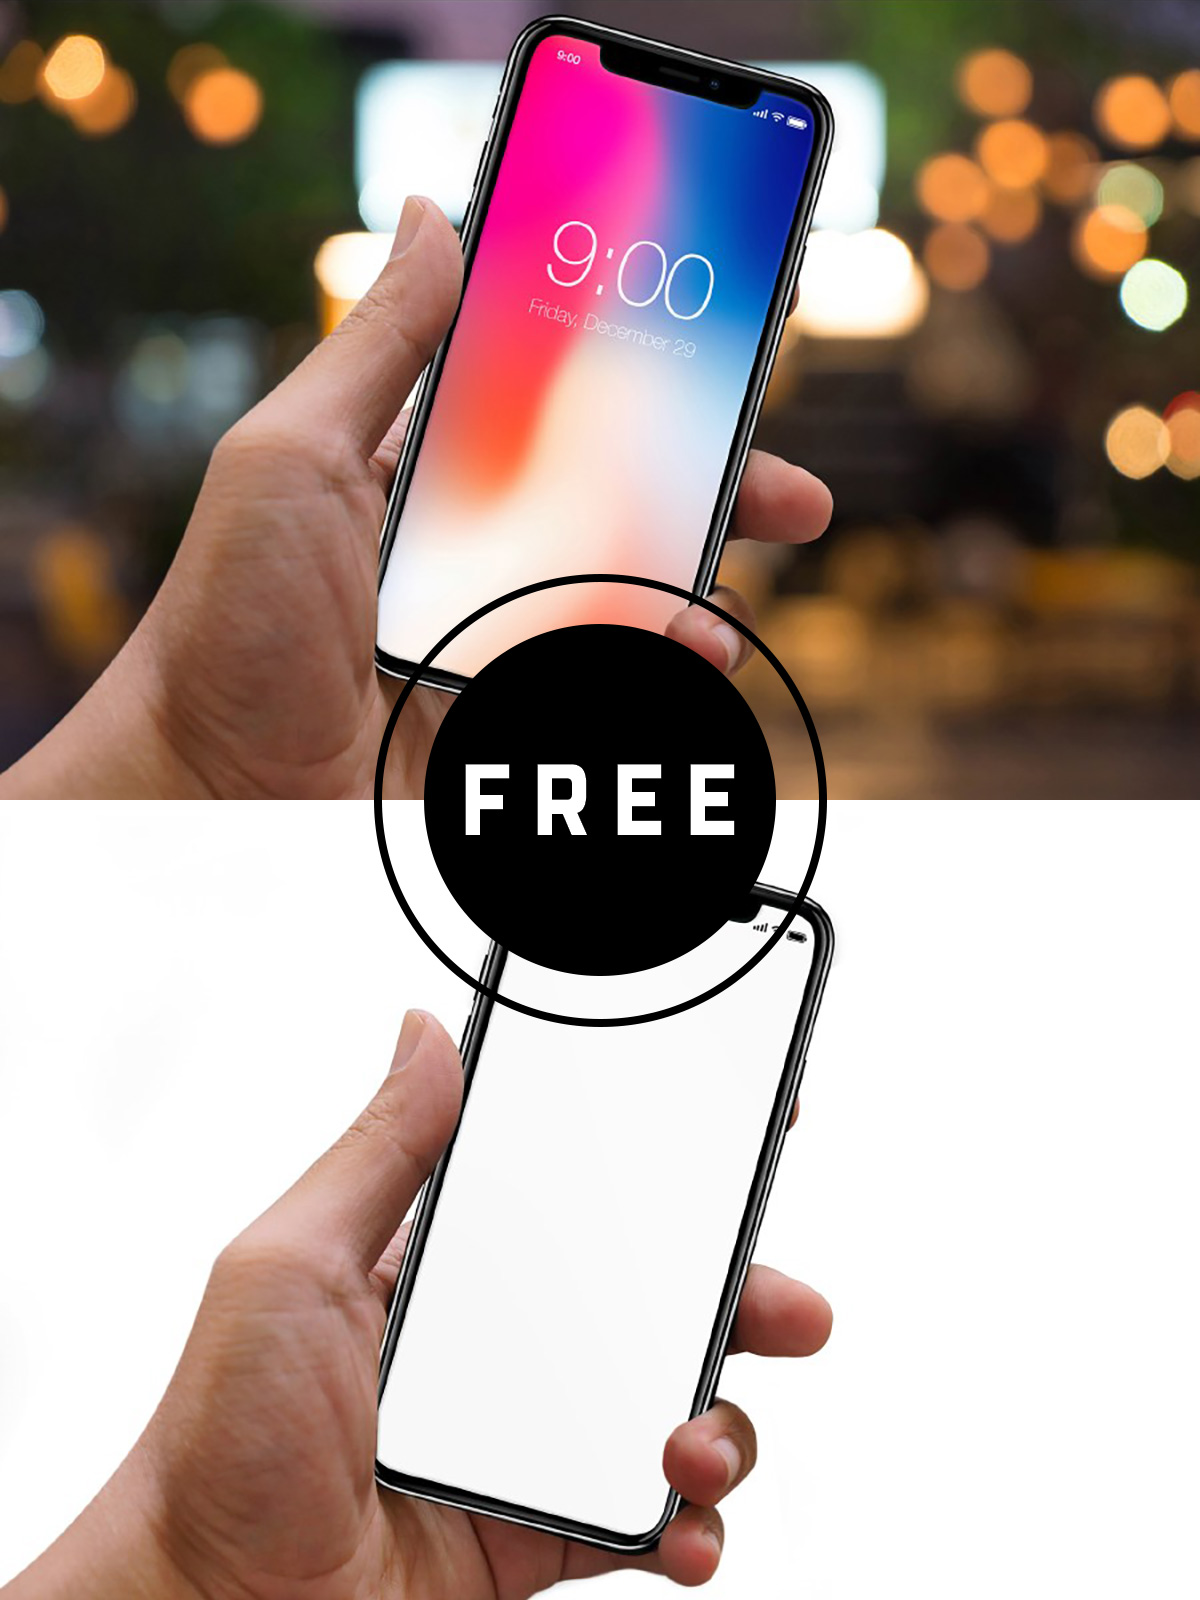 75 Best Free iPhone X, iPhone XS, iPhone XS Max & iPhone XR Mockup Templates & Resources